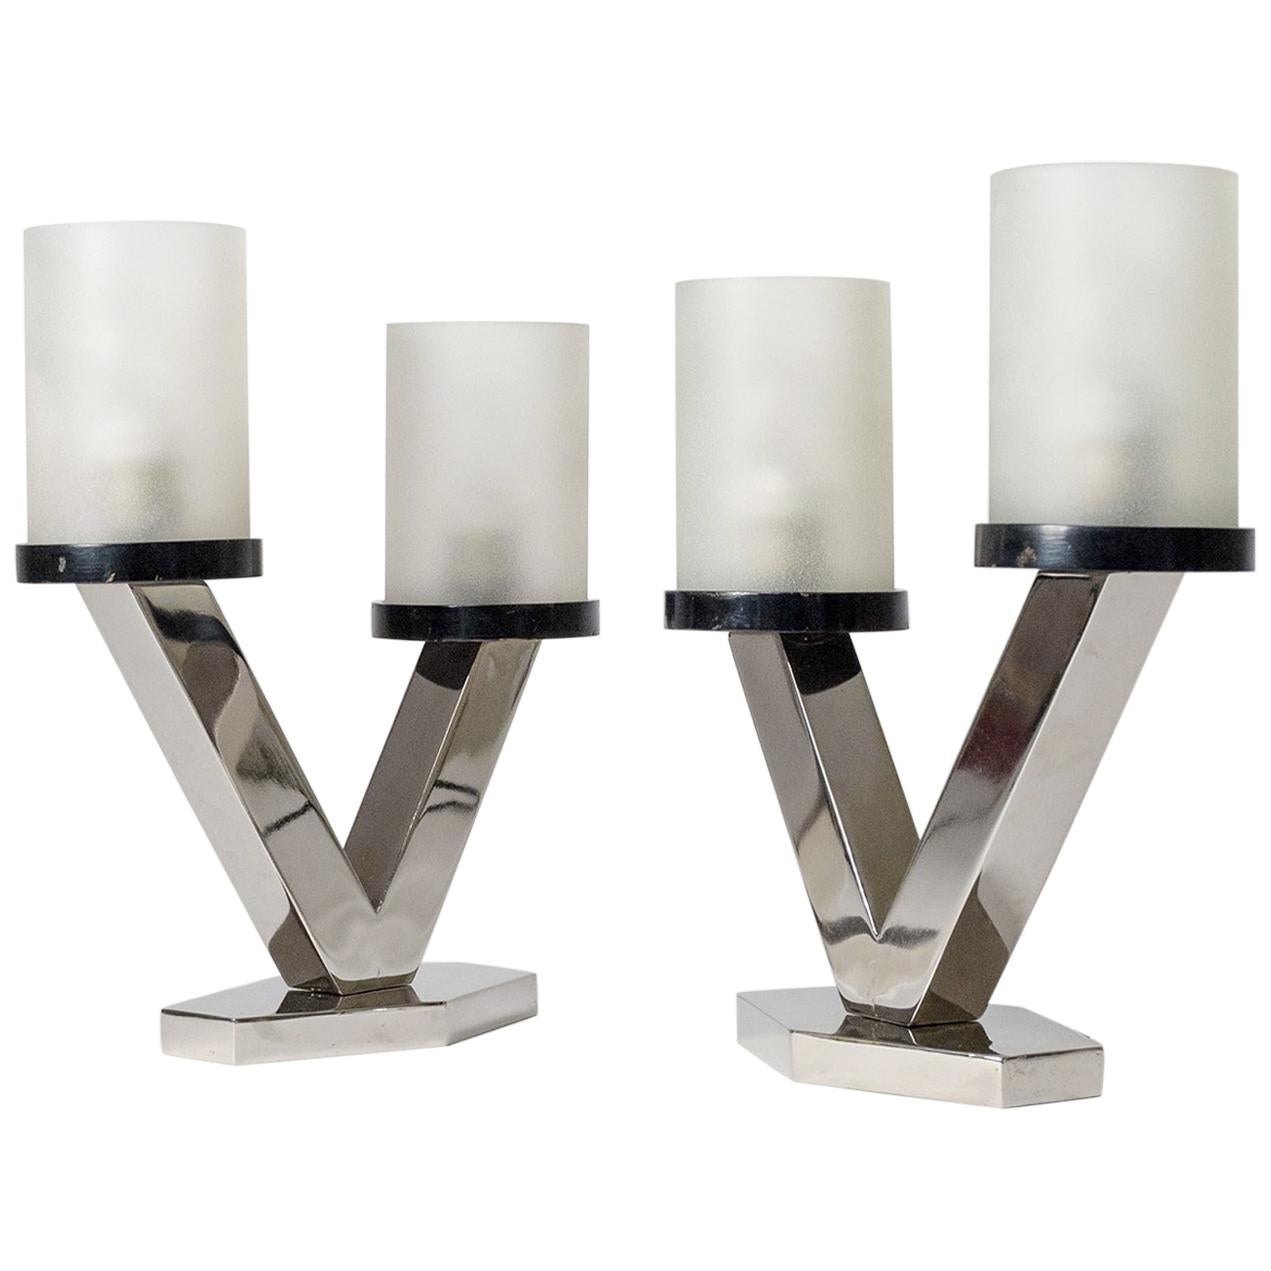 1920s Art Deco Table Lamps, Nickel and Glass